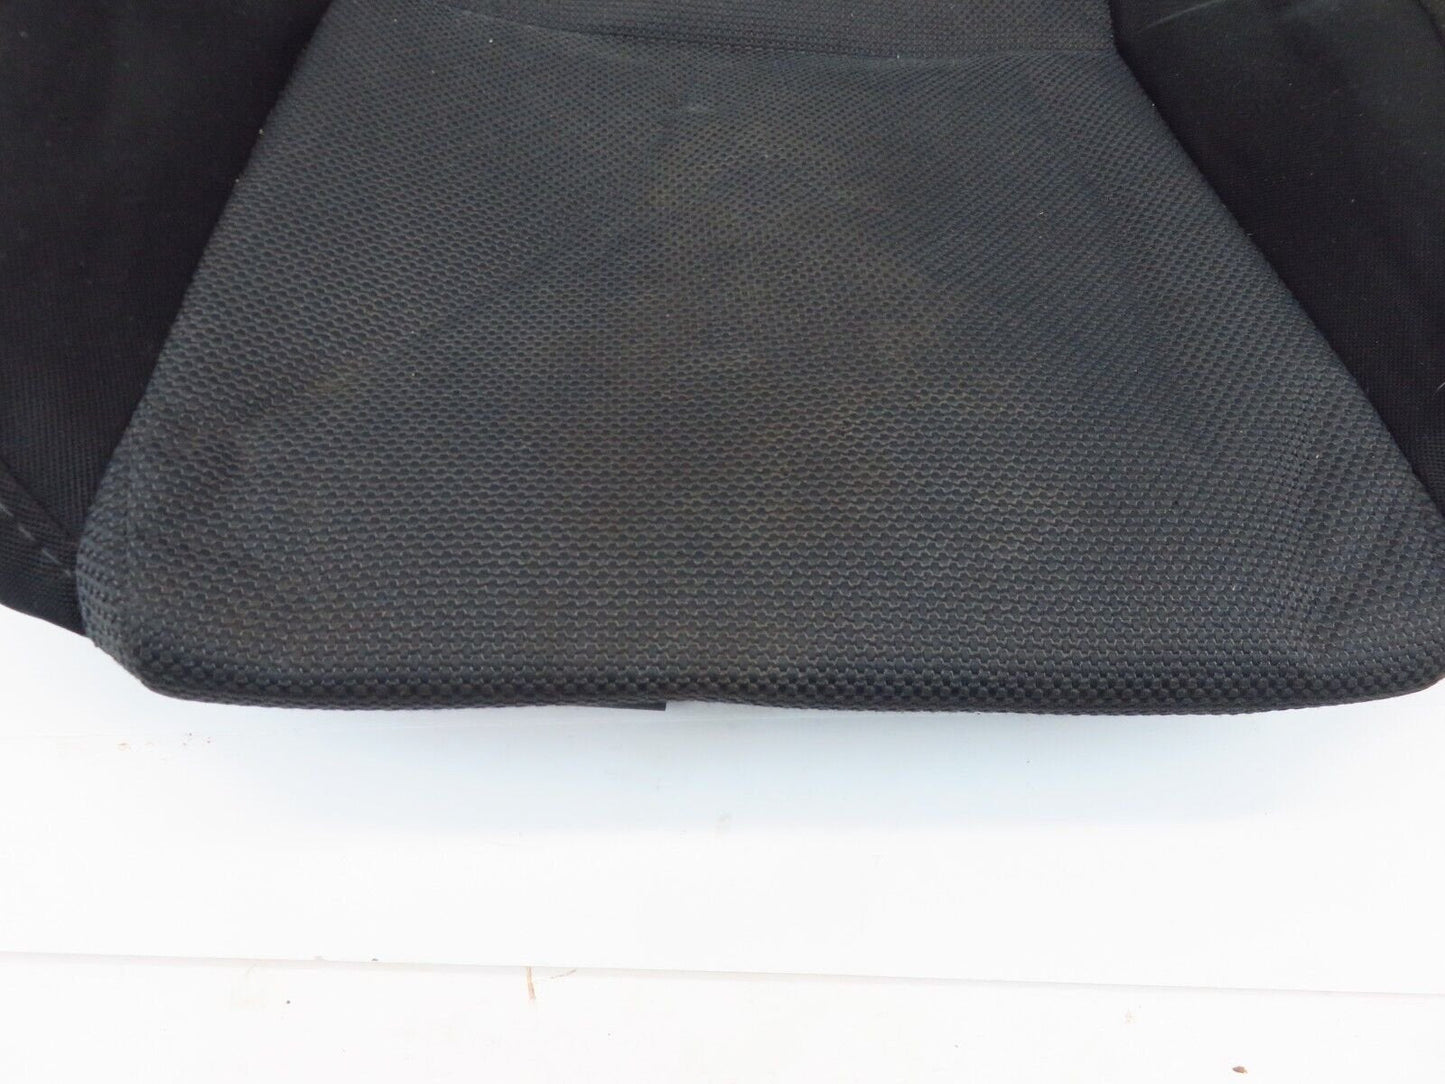 2018 Subaru WRX Driver Front Seat Cover Skin Bottom Lower LH Cloth 2015-2019